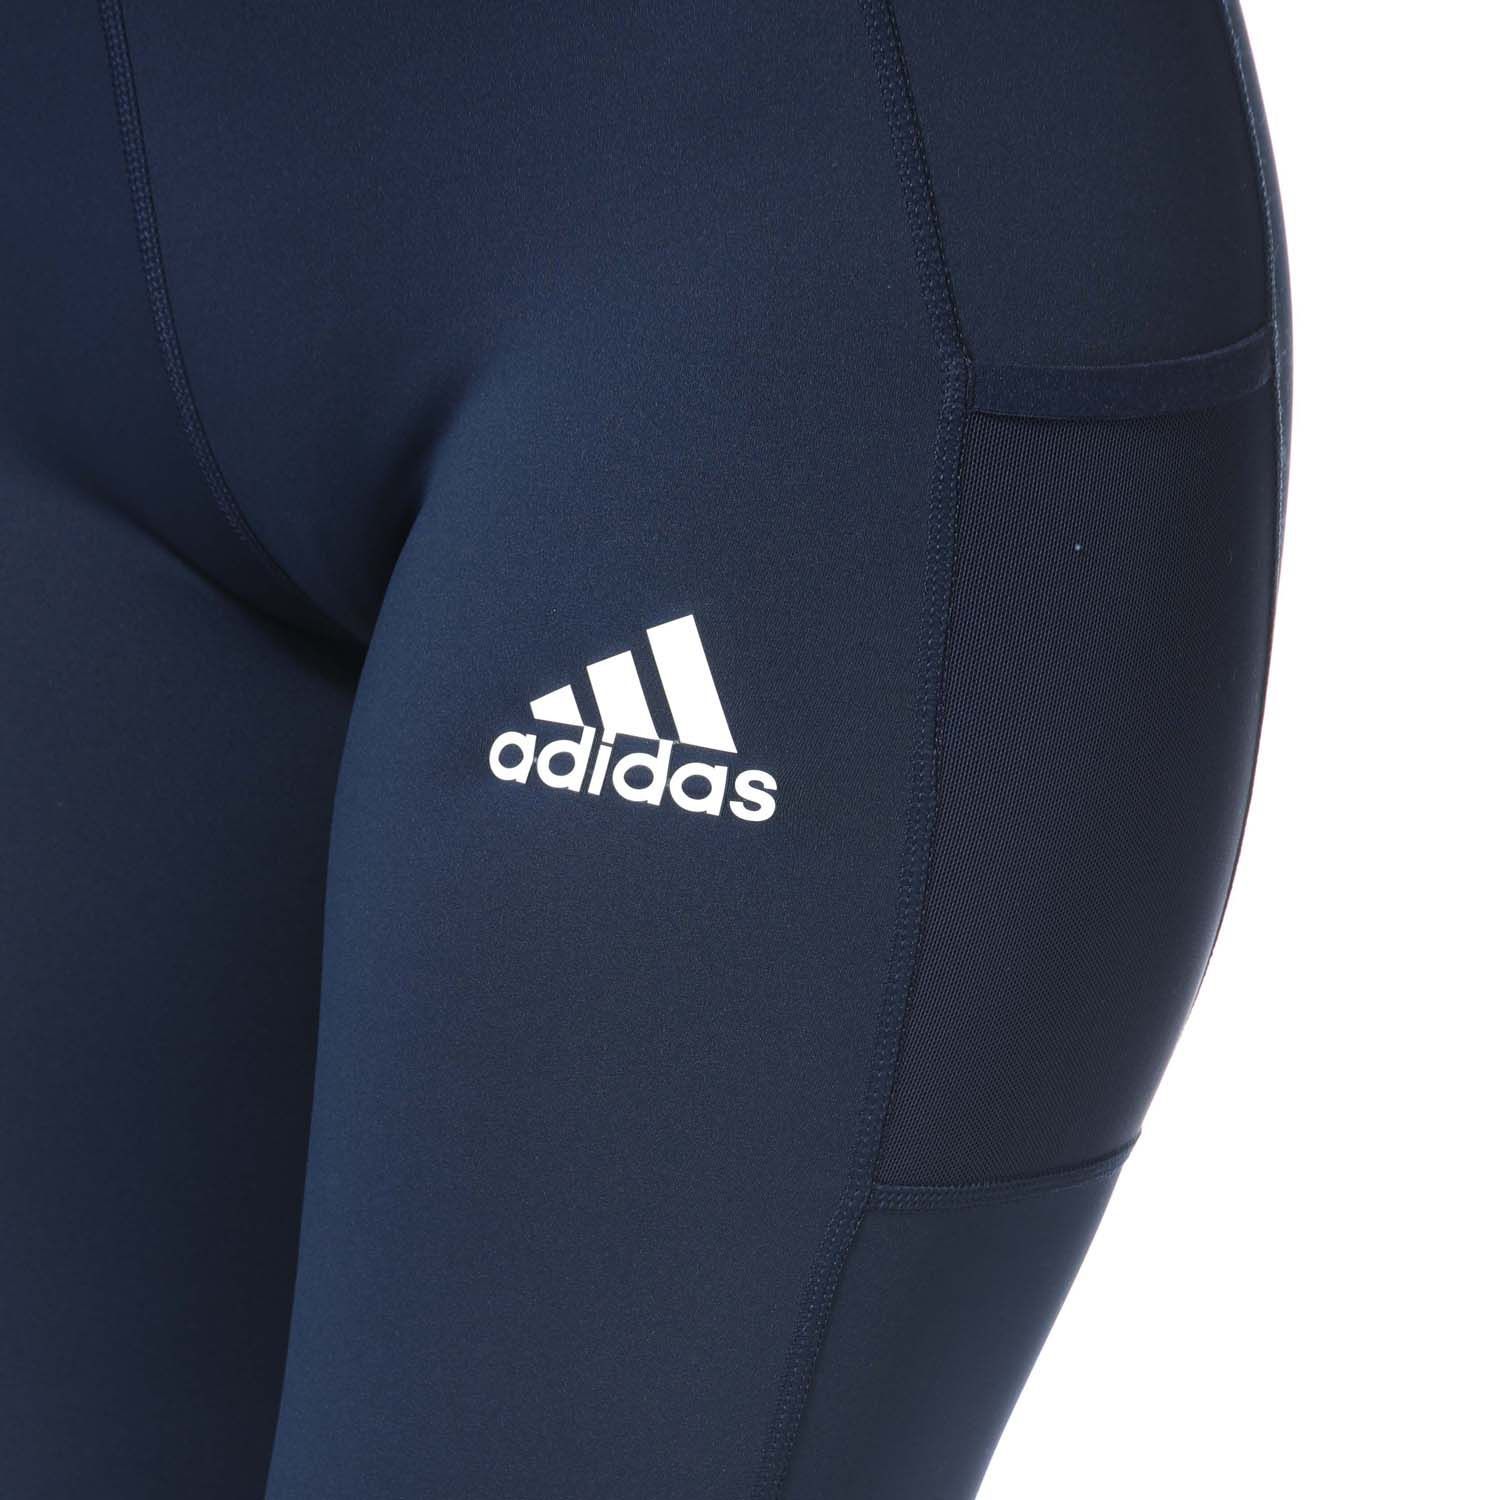 Womens adidas Alphaskin 3-4 Tights in indigo.- Wide elastic waistband.- Ventilated crotch gusset panel.- Climalite wicking system.- Center back.- Alphaskin compression.- adidas Badge of Sport logo screen printed on the leg.- Main Material: 85% Polyester (Recycled)  15% Elastane.  Machine washable. - Ref: FL9501